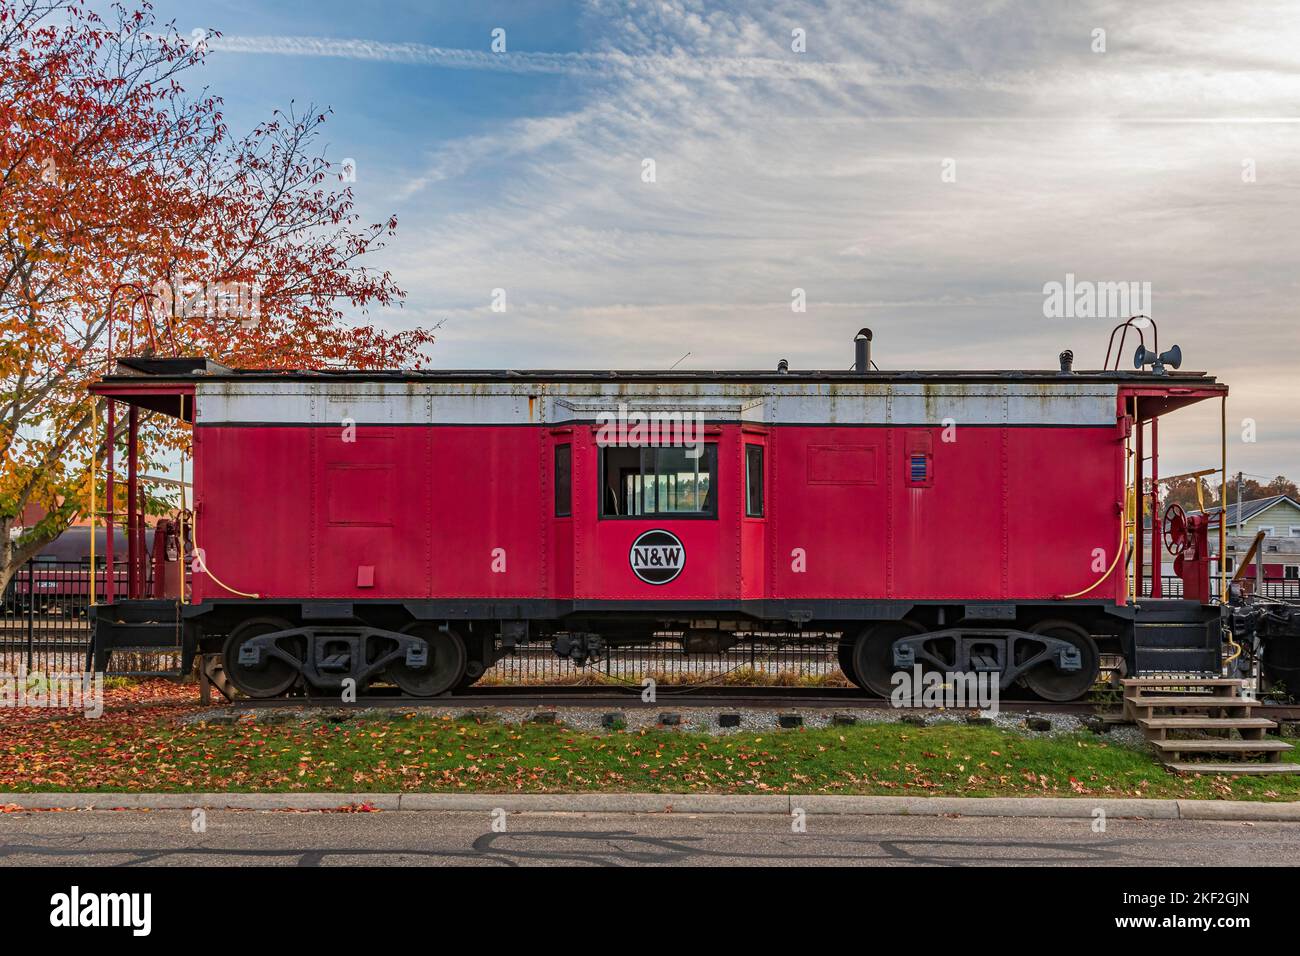 Dennison, Ohio, USA- Oct. 24, 2022: Caboose railcar on dispaly at the Dennison Railroad Depot Museum on an autumn day. Stock Photo